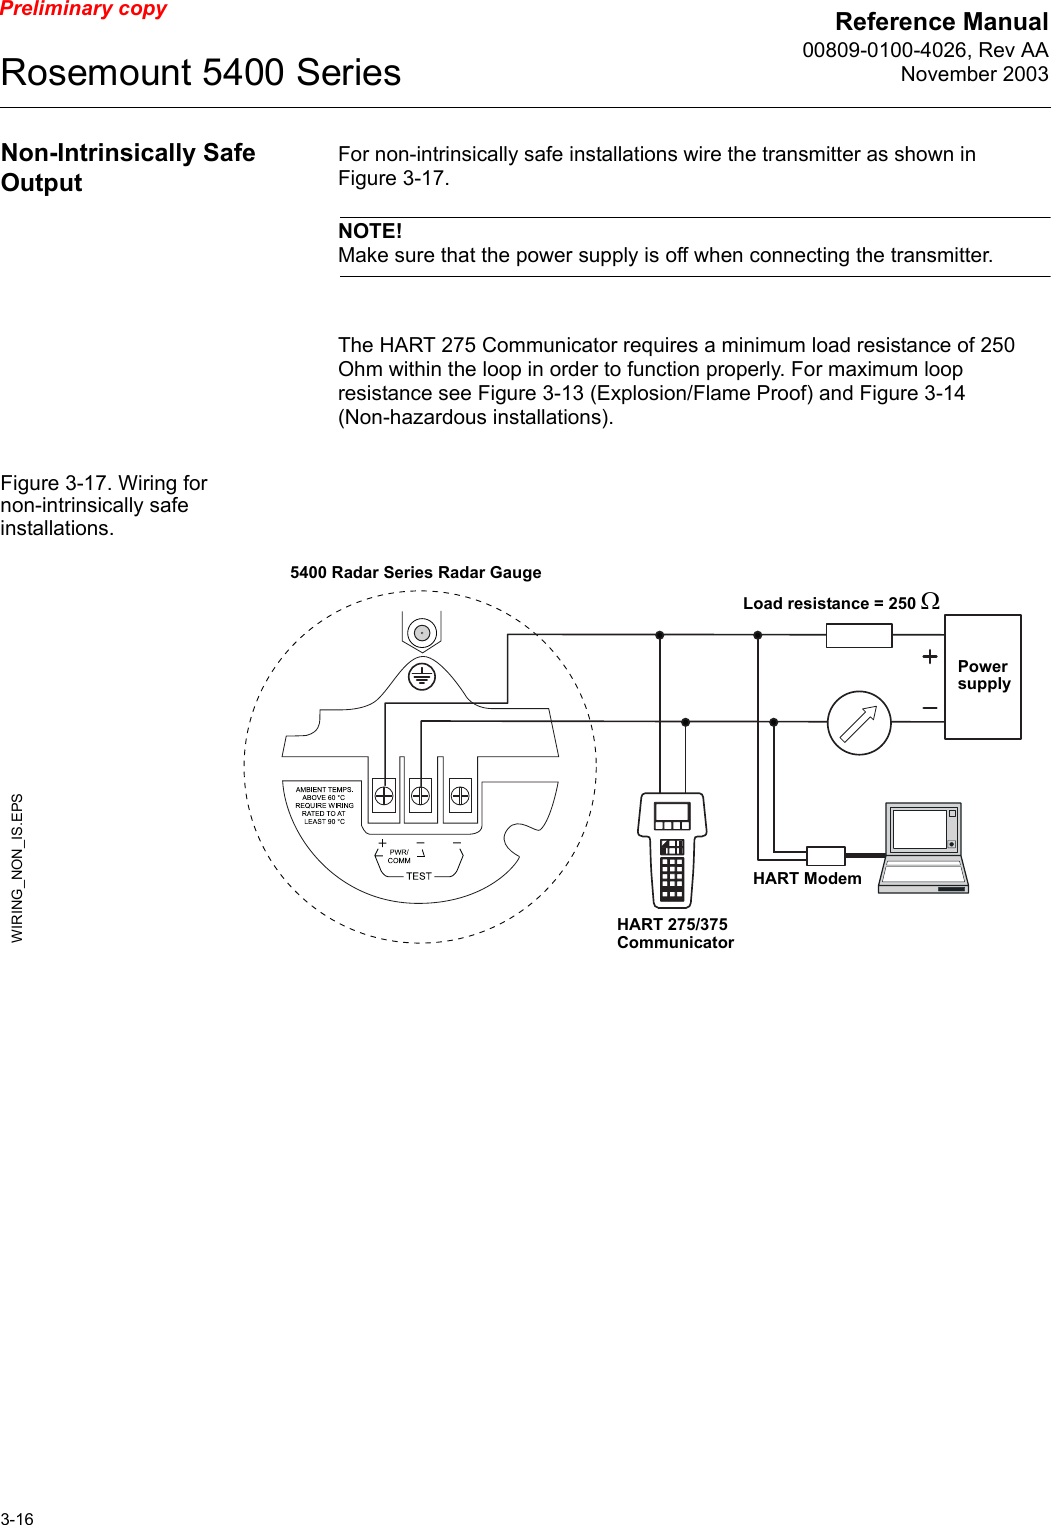 Reference Manual00809-0100-4026, Rev AANovember 2003Rosemount 5400 Series3-16Preliminary copyNon-Intrinsically Safe OutputFor non-intrinsically safe installations wire the transmitter as shown in Figure 3-17. NOTE!Make sure that the power supply is off when connecting the transmitter.The HART 275 Communicator requires a minimum load resistance of 250 Ohm within the loop in order to function properly. For maximum loop resistance see Figure 3-13 (Explosion/Flame Proof) and Figure 3-14 (Non-hazardous installations).Figure 3-17. Wiring for non-intrinsically safe installations.Power supplyWIRING_NON_IS.EPSHART 275/375 CommunicatorLoad resistance = 250 ΩHART Modem5400 Radar Series Radar Gauge